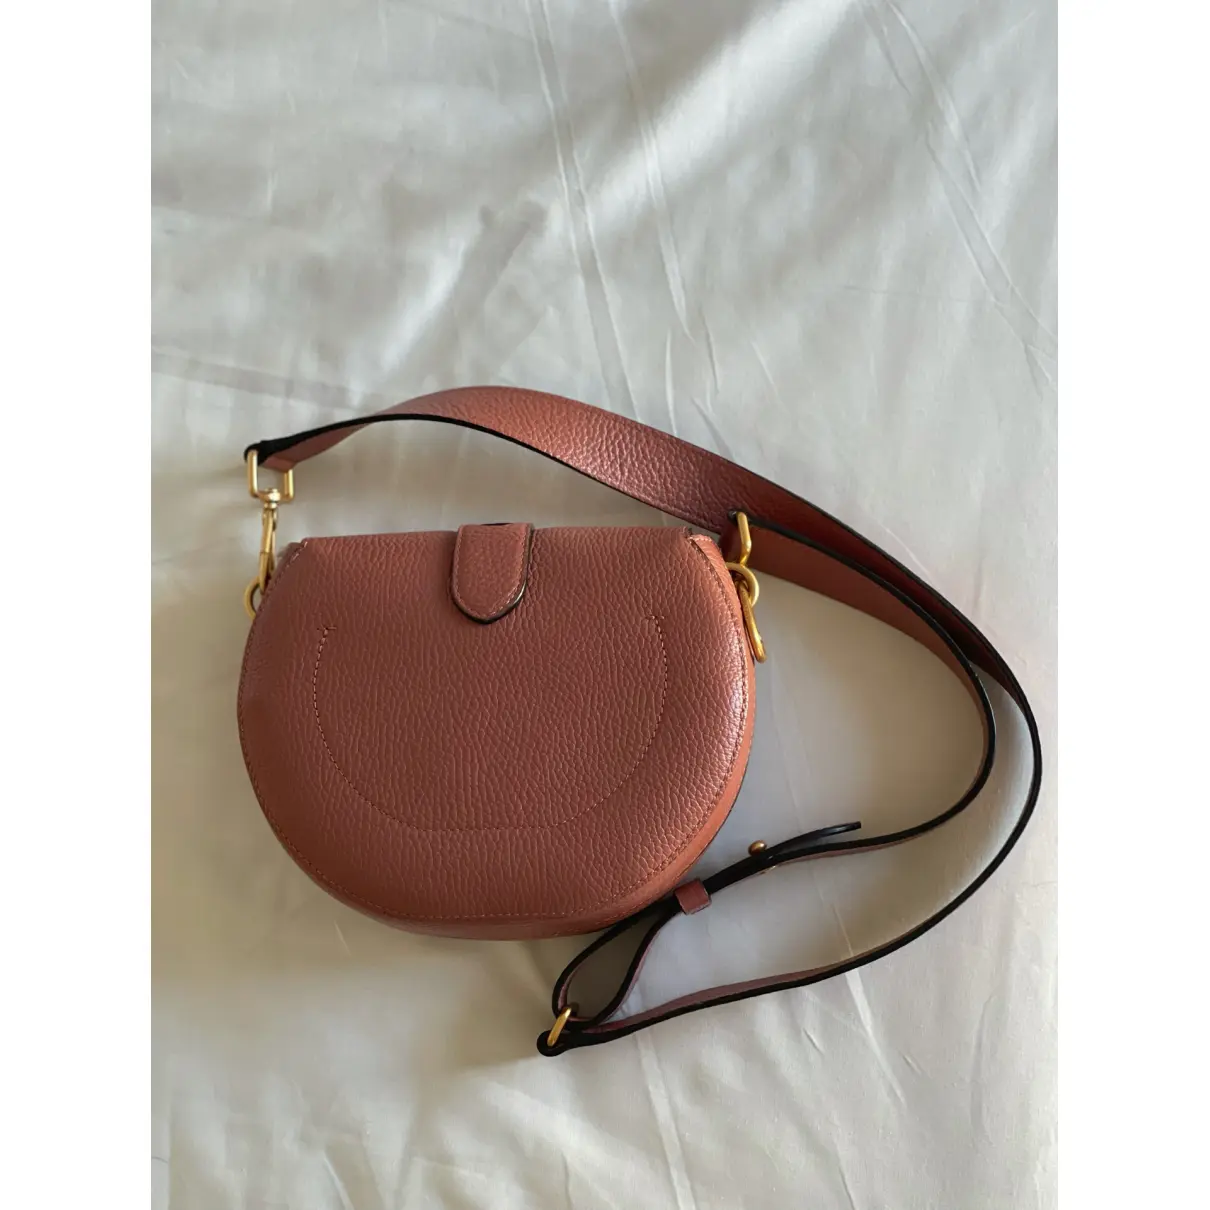 Buy Coccinelle Leather crossbody bag online